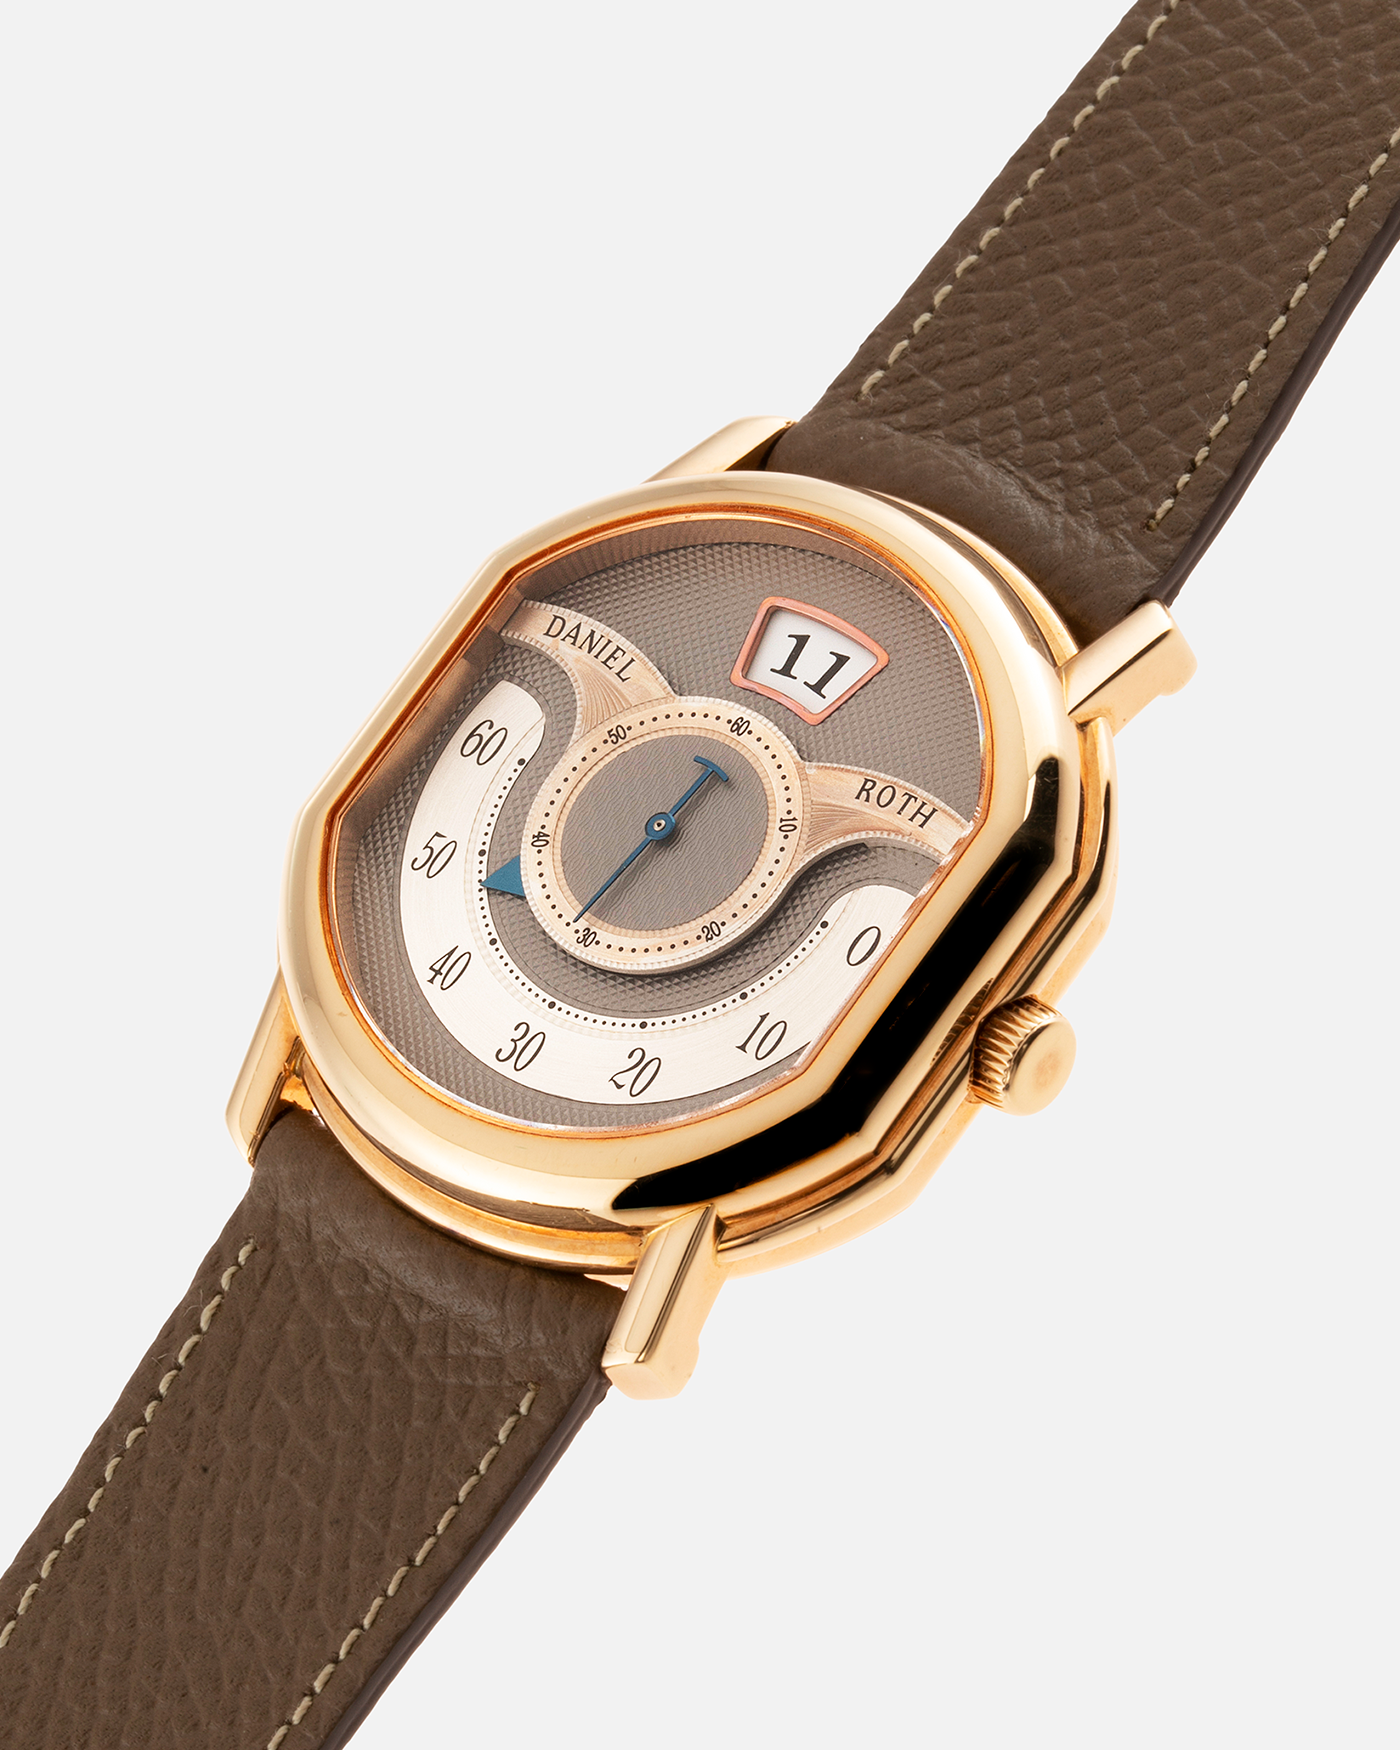 Brand: Daniel Roth Year: 1999 Model: 10th Anniversary Papillon Material: 18k Rose Gold Movement: Daniel Roth Calibre DR113 Case Diameter: 35mm X 41mm X 11mm Bracelet/Strap: Nostime Taupe Textured Calf Strap with 18k Rose Gold Tang Buckle